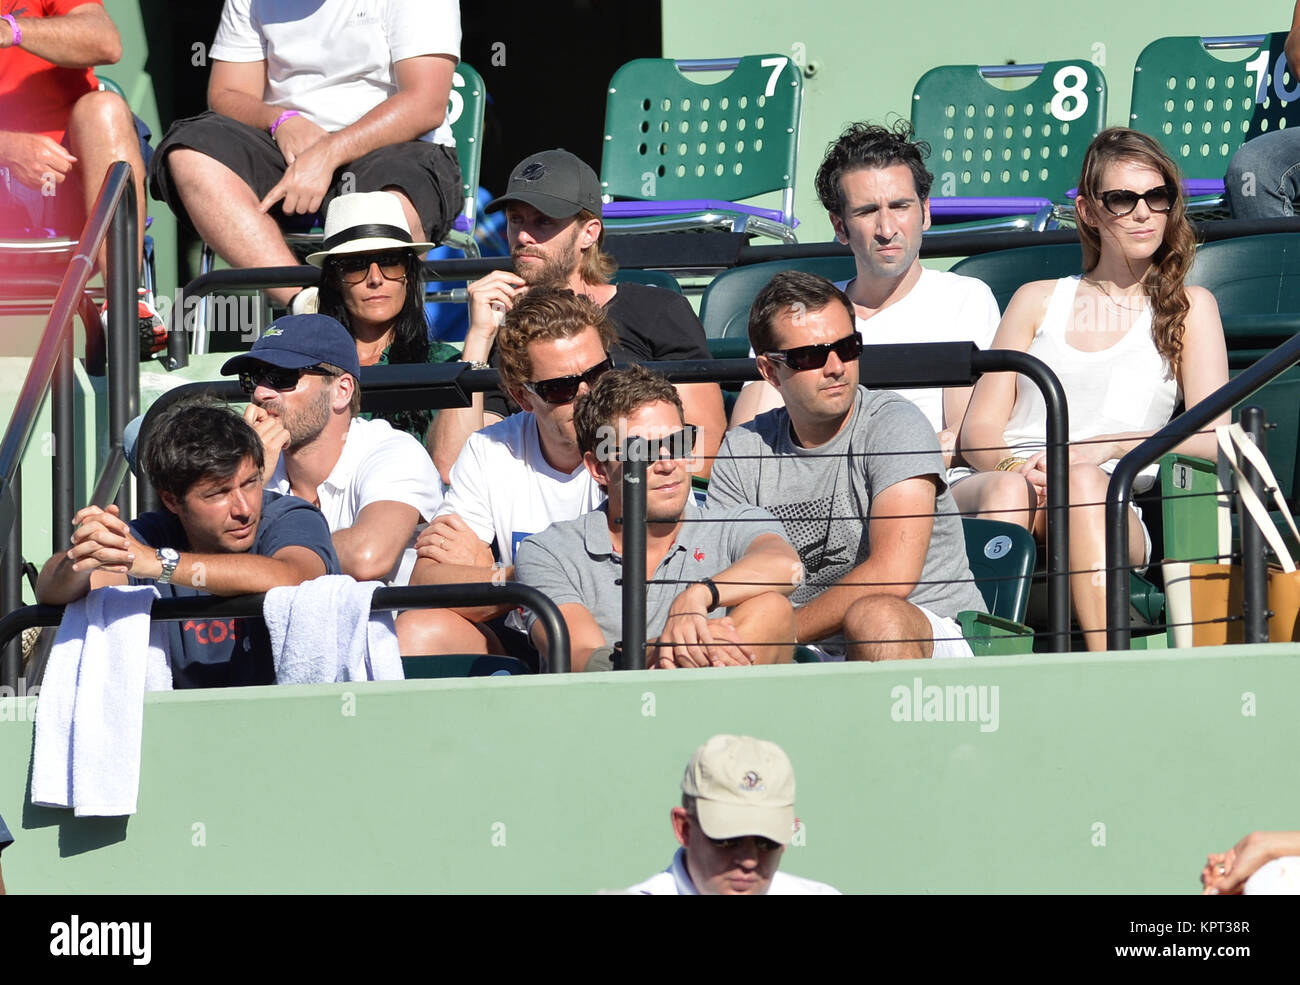 KEY BISCAYNE, FL - MARCH 25: Roger Federer of Switzerland defeats Richard Gasquet of France during their fourth round match during day 9 at the Sony Open at Crandon Park Tennis Center on March 25, 2014 in Key Biscayne, Florida.   People:  Richard Gasquet Box Stock Photo